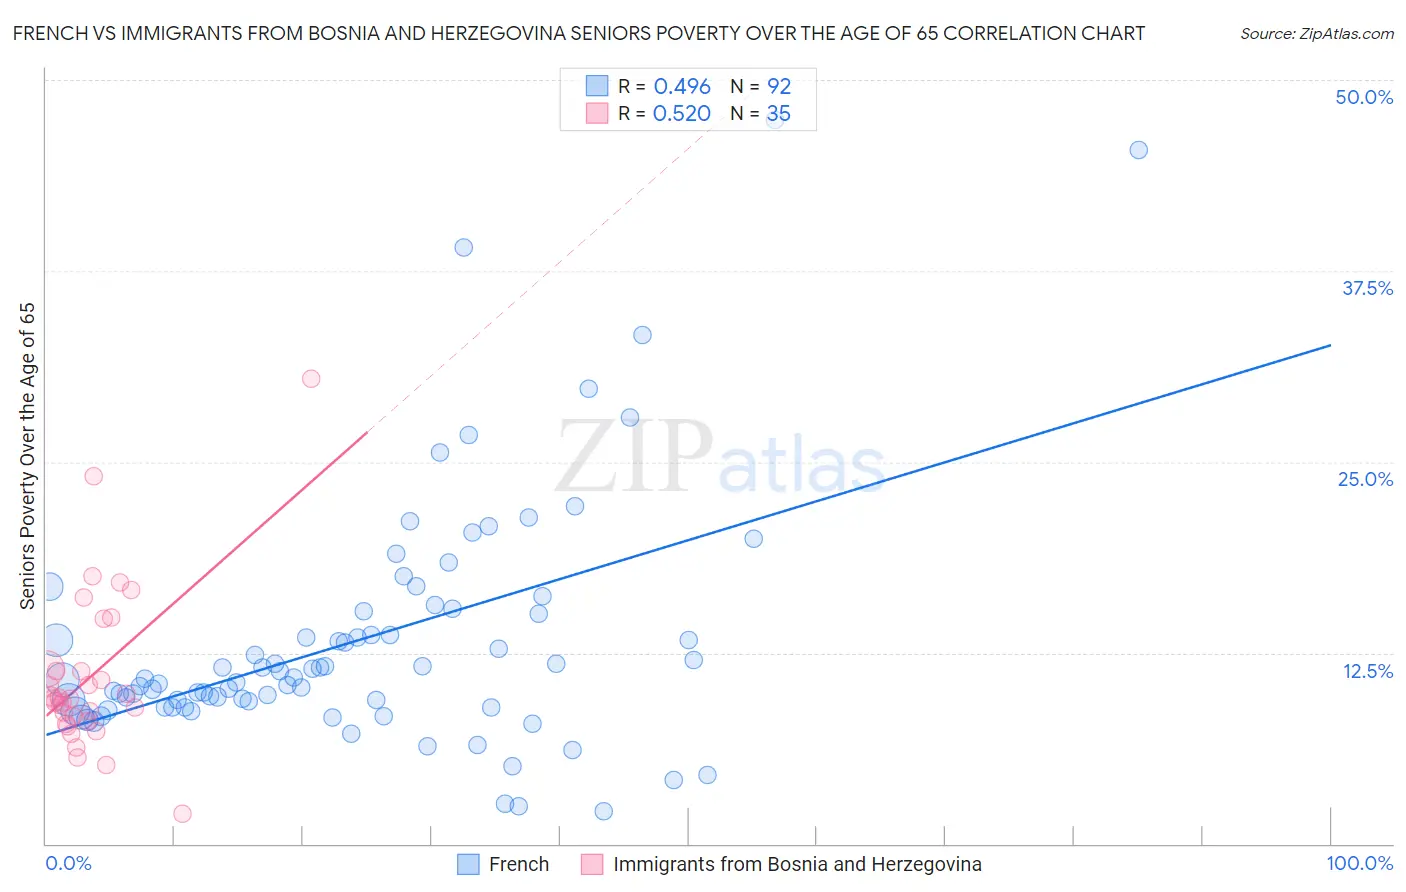 French vs Immigrants from Bosnia and Herzegovina Seniors Poverty Over the Age of 65